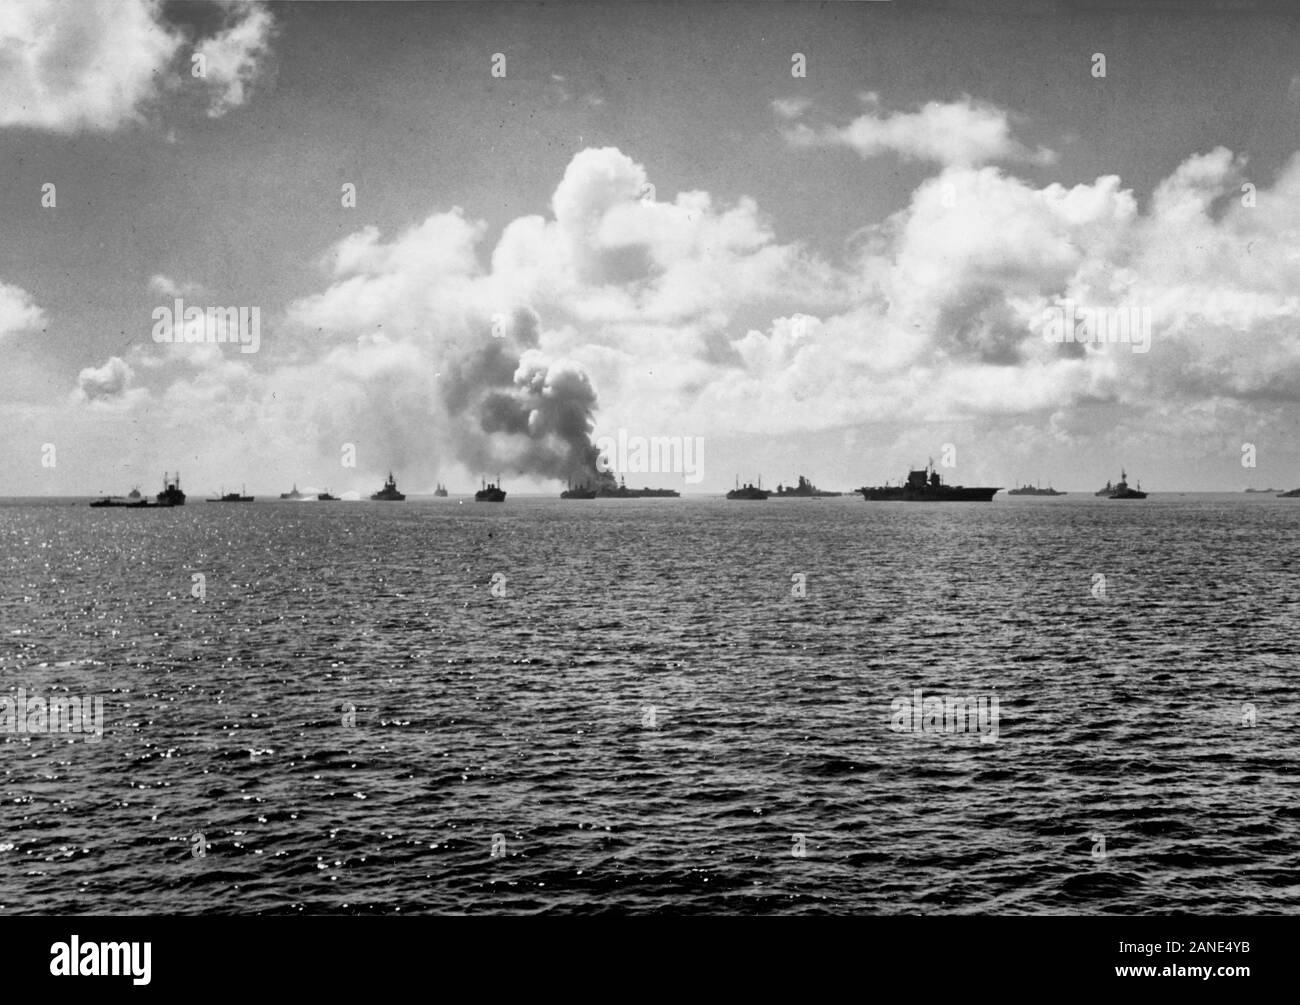 Bikini Atoll Atomic Bomb Tests, 1946: View of the target fleet immediately after the 'Able' aerial burst on 1 July 1946. The aircraft carrier USS Saratoga (CV-3) is in the center with USS Independence (CVL-22) burning at left-center. The ex-Japanese battleship Nagato is between them. Note the ship at left next to the battleship USS Pennsylvania (BB-38) trying to wash down the radioactivity with (contaminated) water from the lagoon. Stock Photo